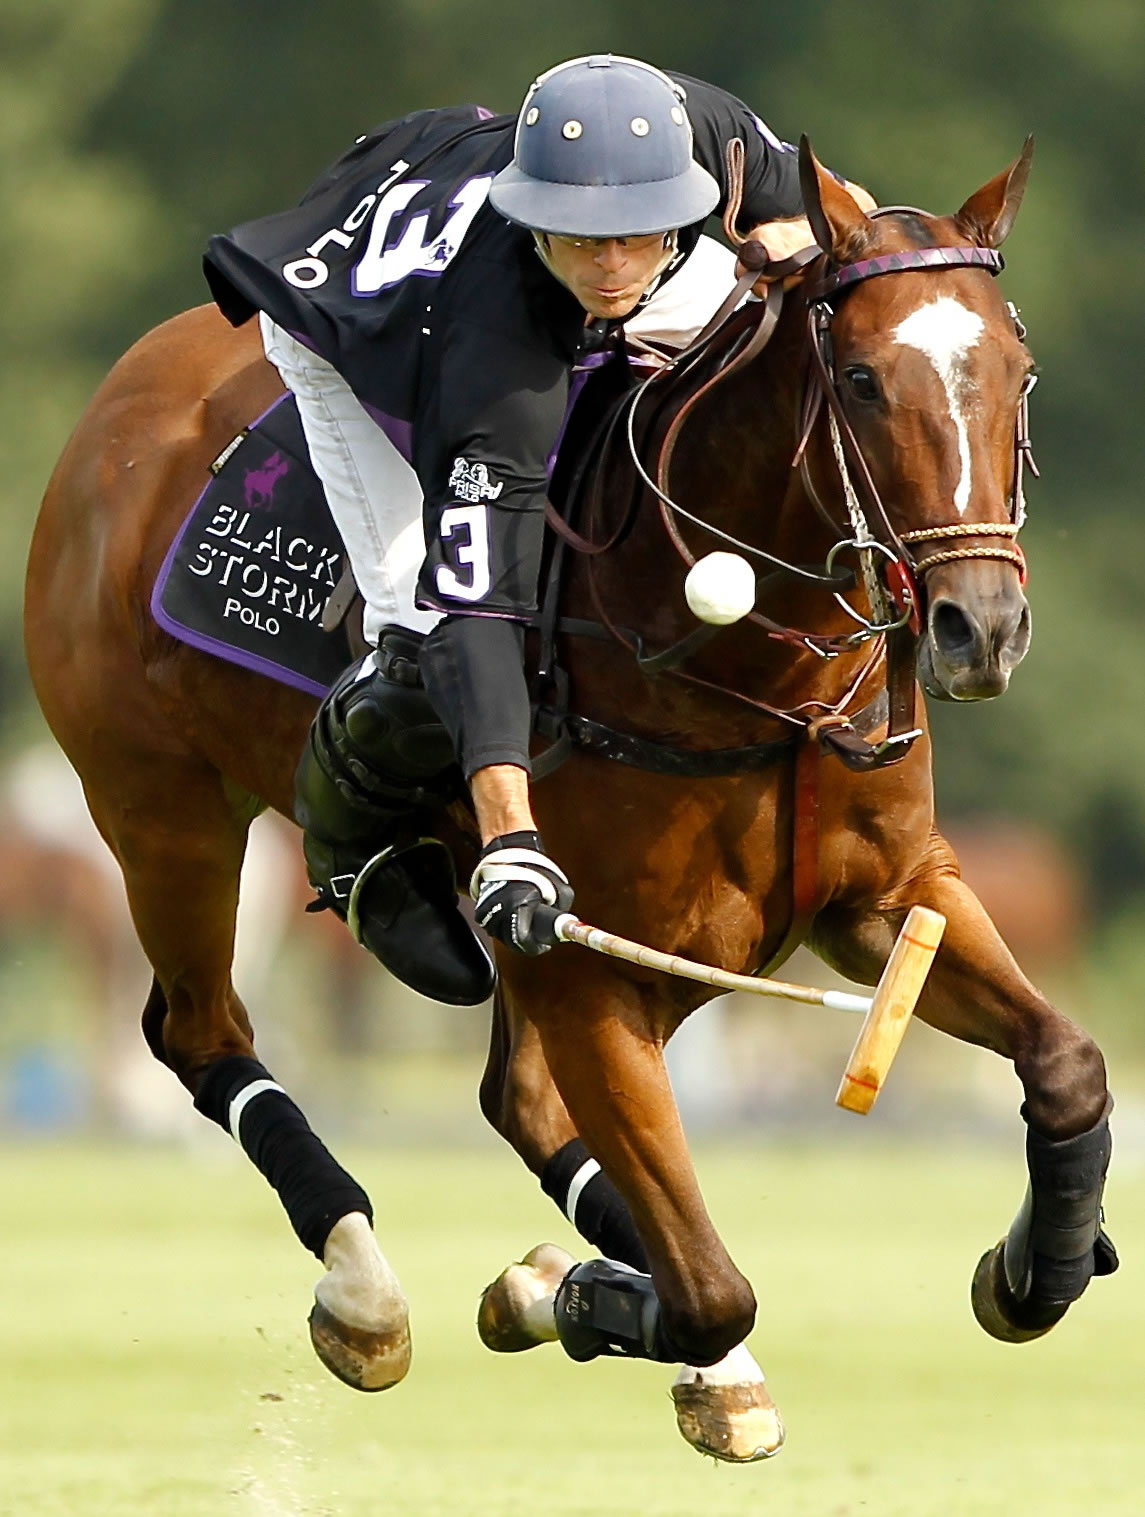 French Polo Open 2011